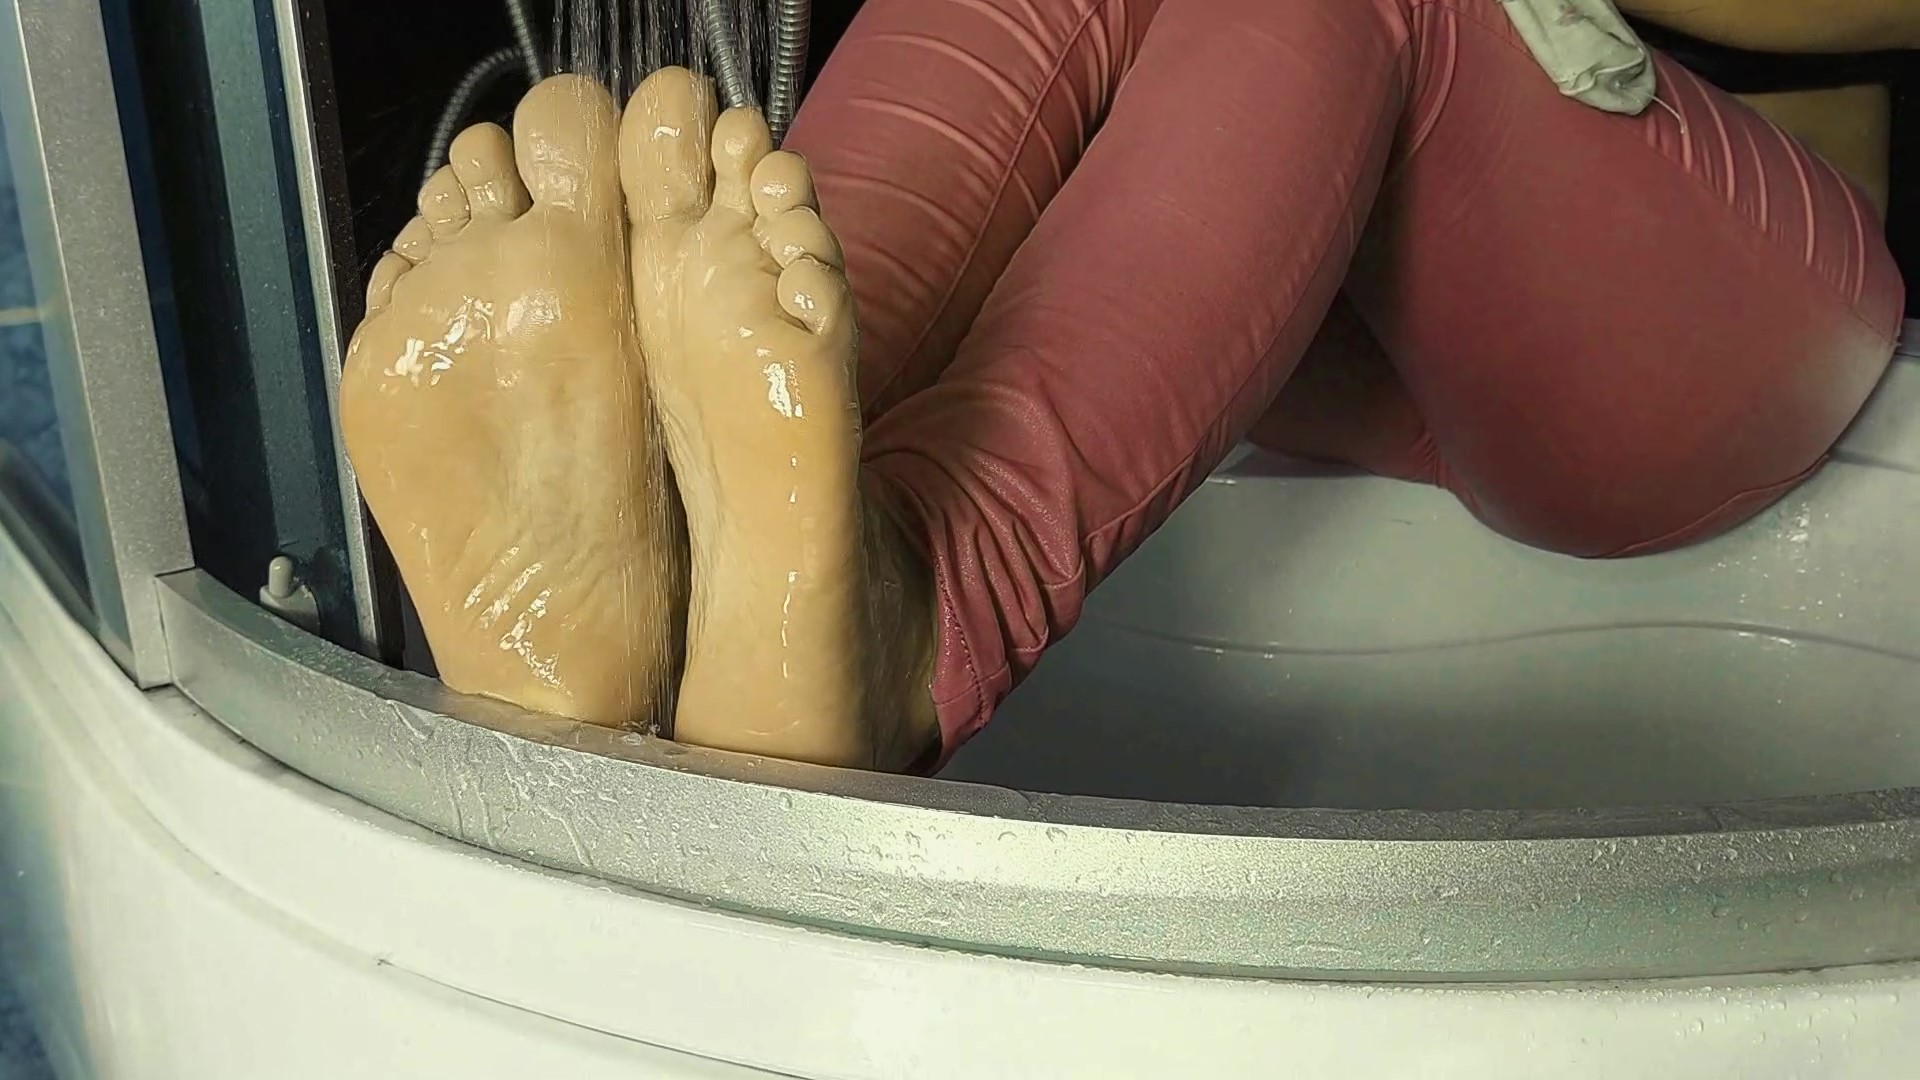 First footfetish video of Gina - frame at 2m1s